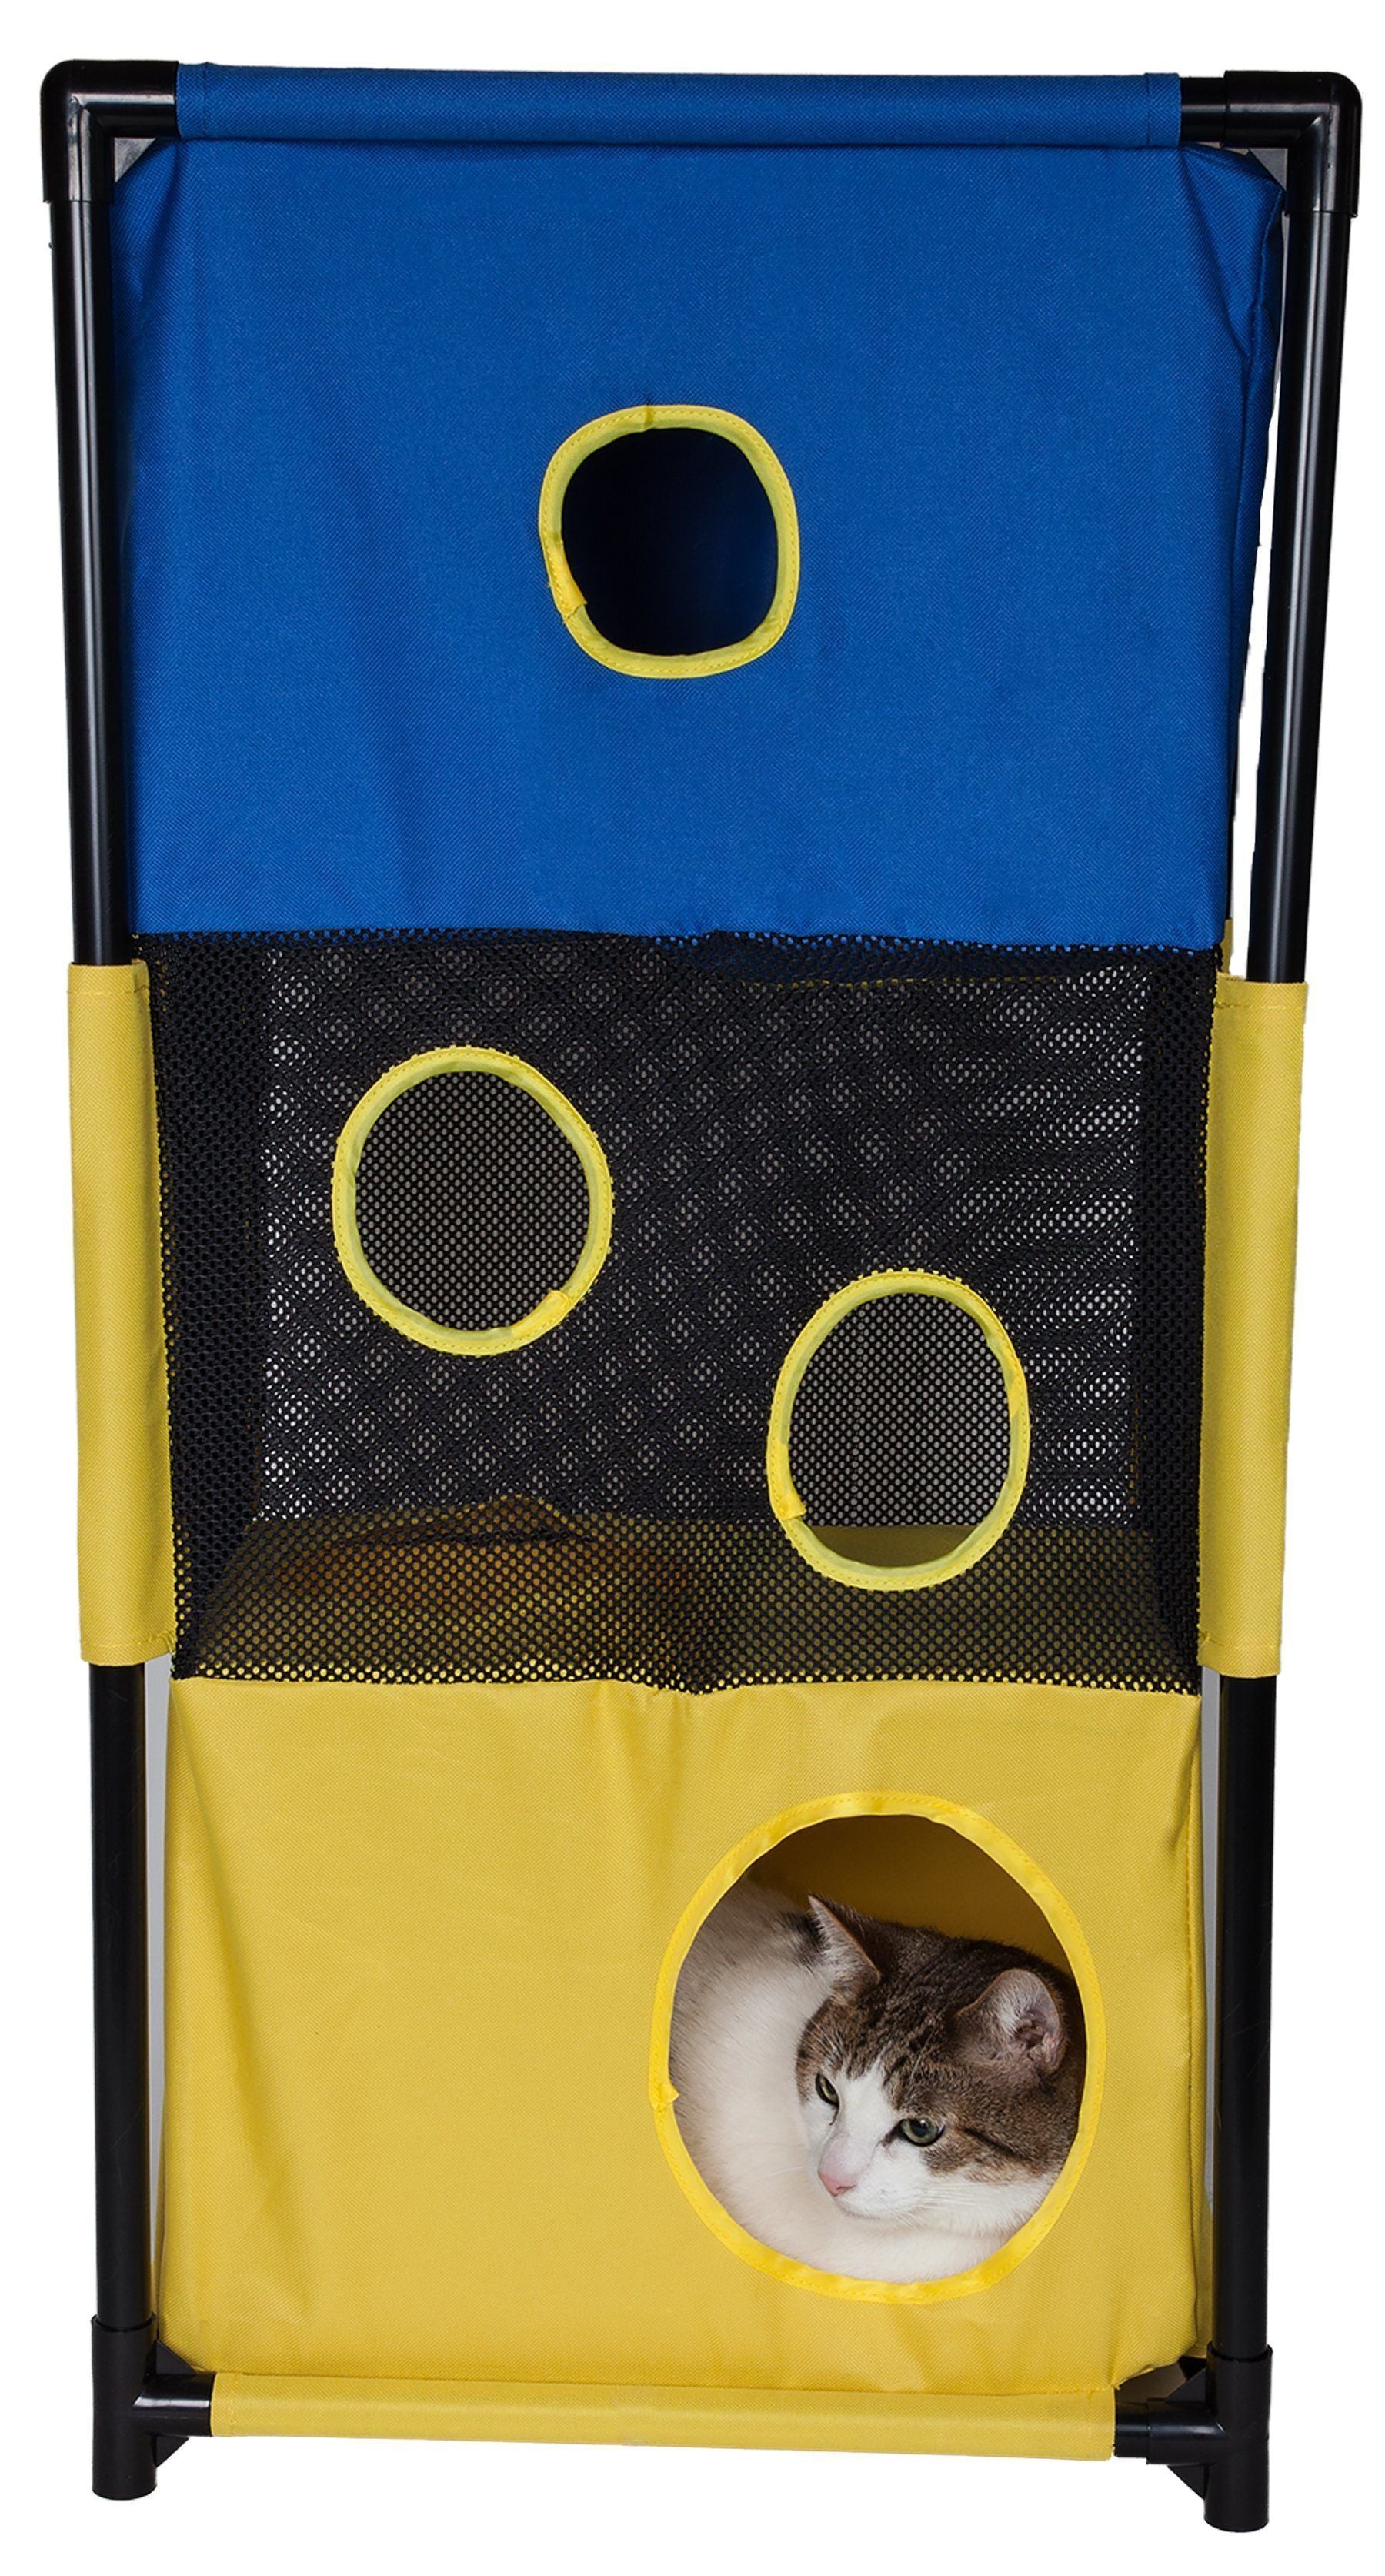 Pet Life ® 'Kitty-Square' Collapsible Travel Interactive Kitty Cat Tree Maze House Lounger Tunnel Lounge Blue, Yellow 